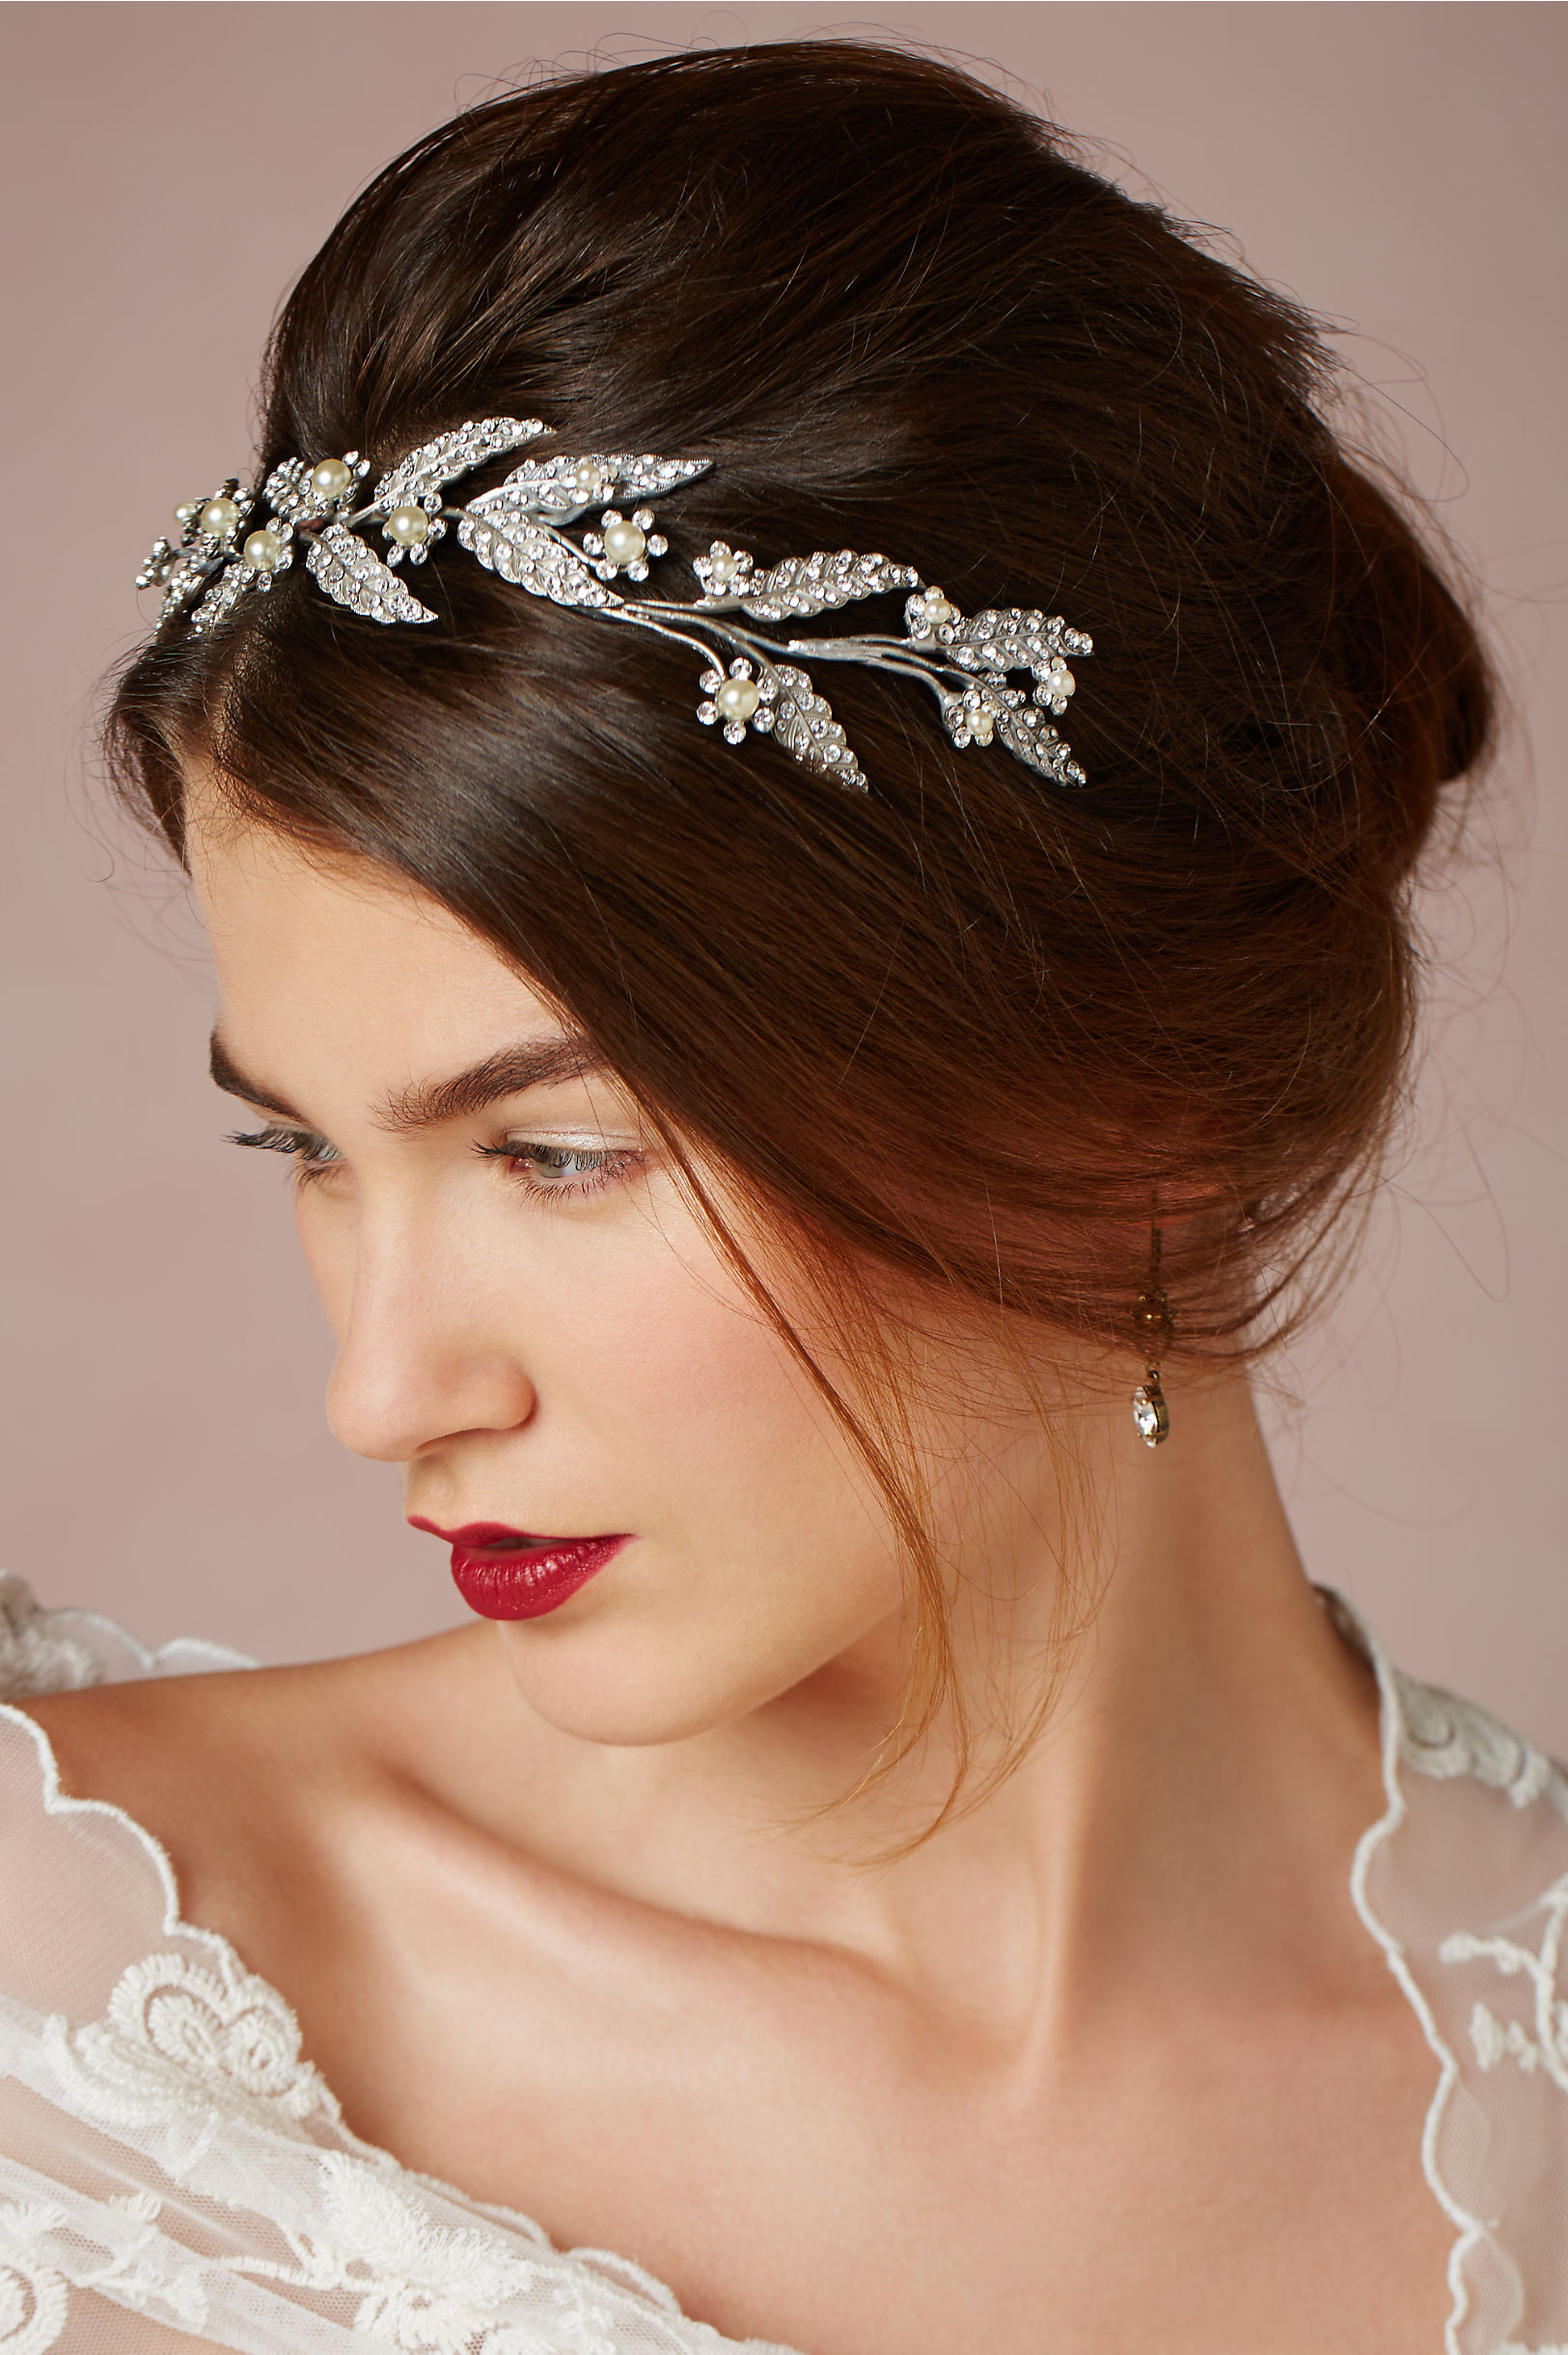 Amazing Bridal Accessories, Shoes & Headpieces